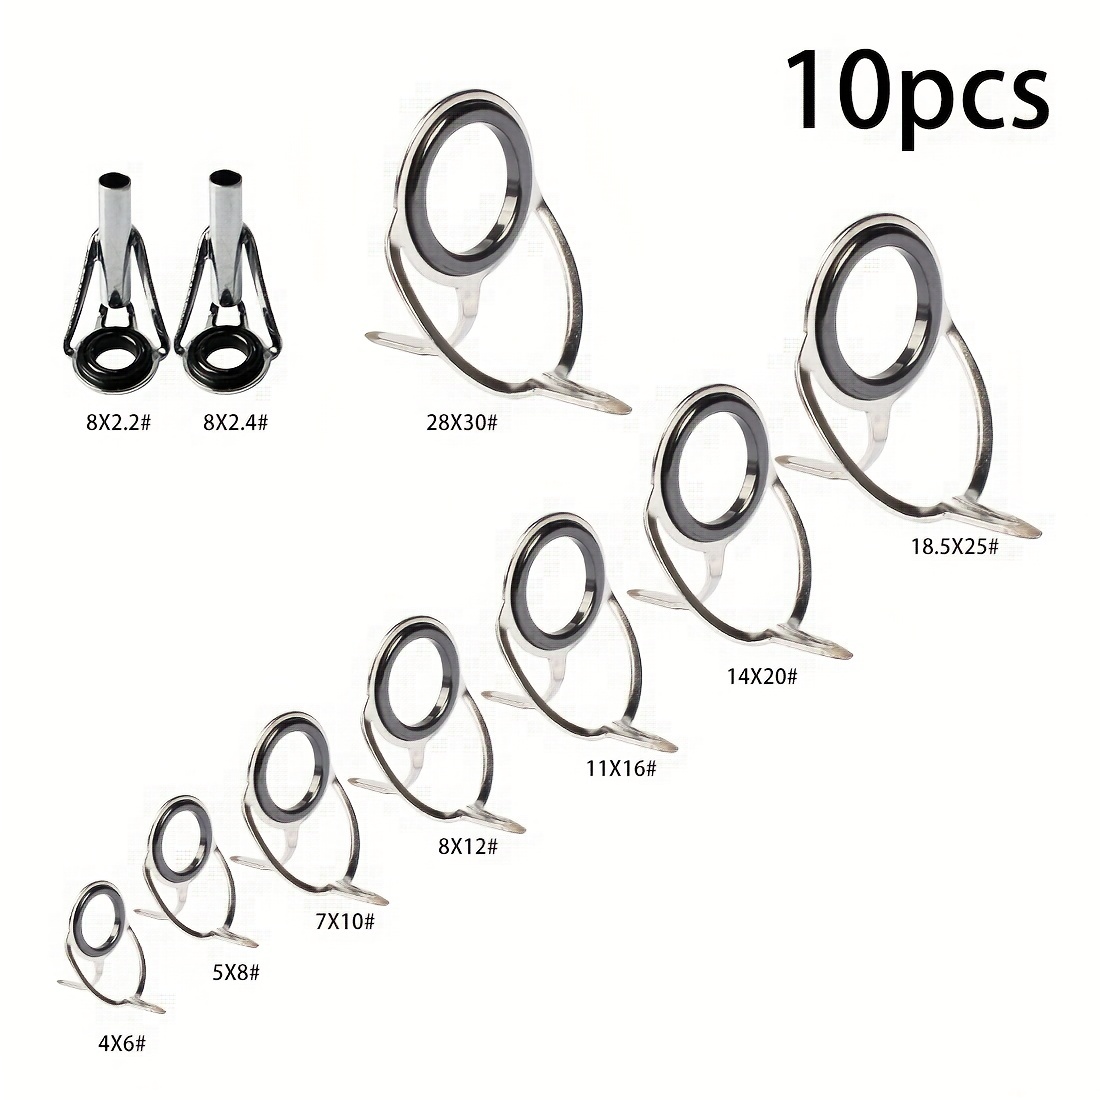 20pcs Curve Hook Fishing Tackle Guide Fishing Rod parts Corrosion Resistant  Fly Guide Ring Accessories